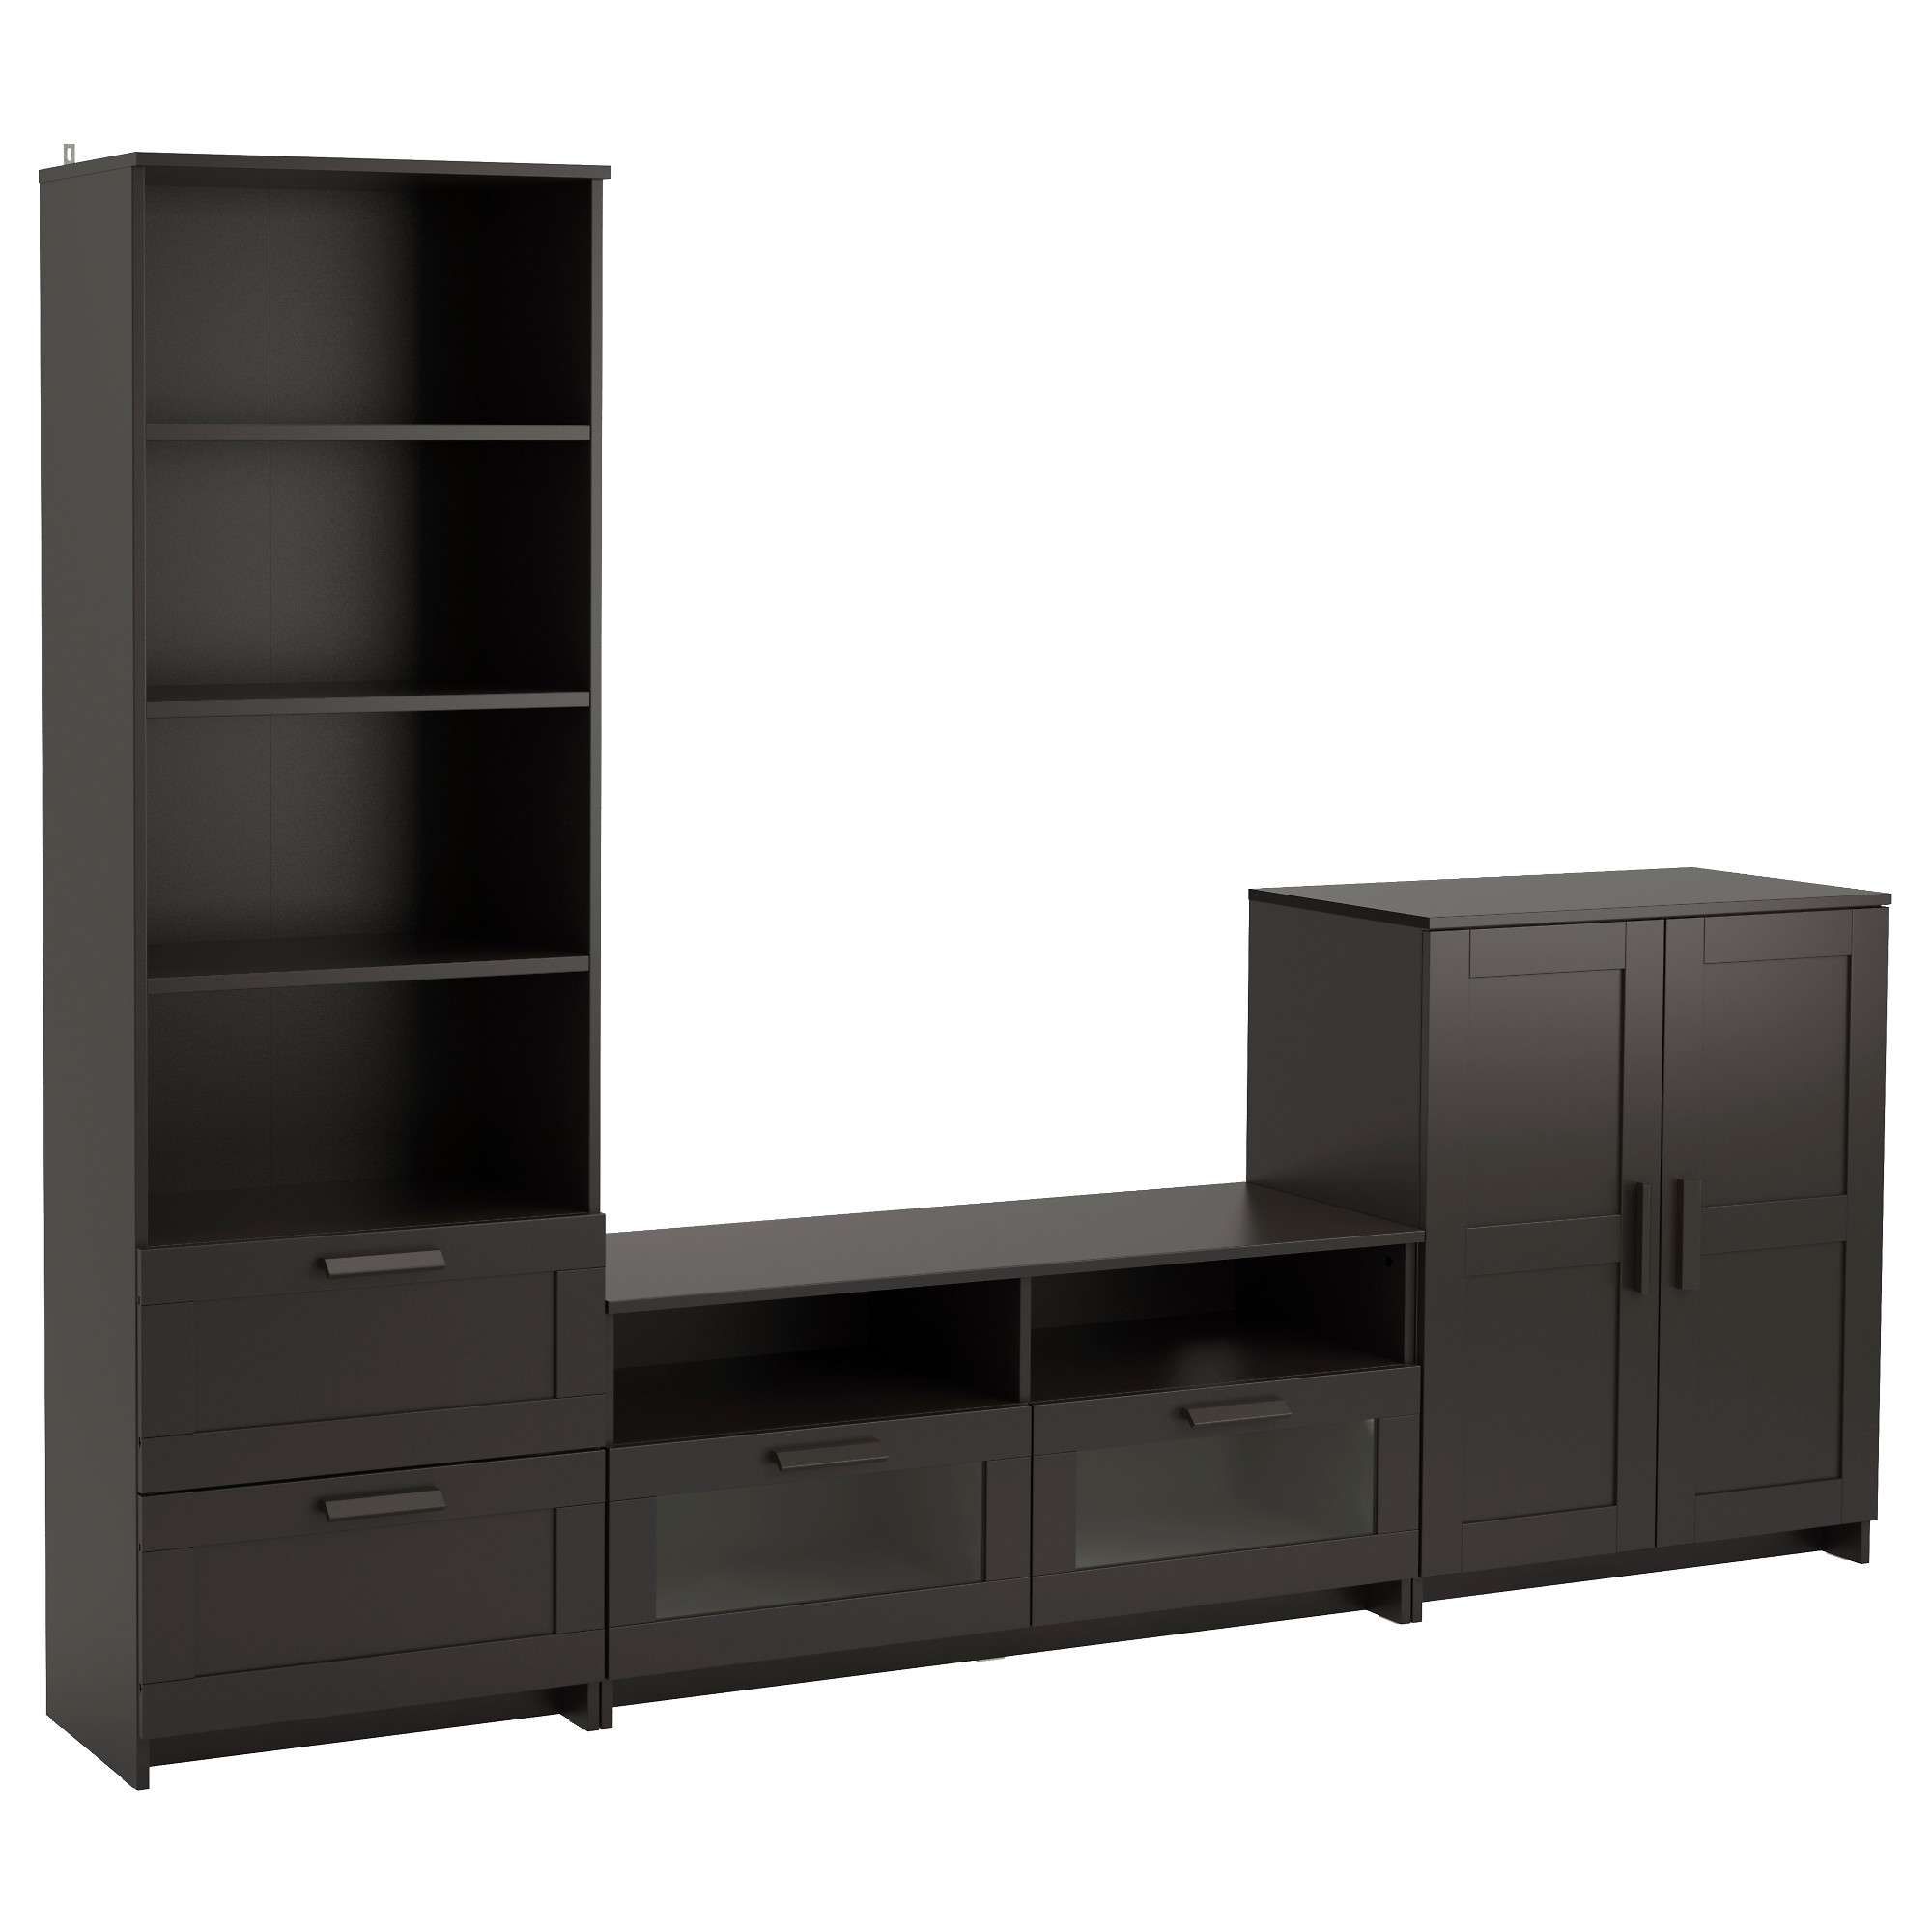 Tv Stands & Tv Units | Ikea In Black Tv Stands With Drawers (View 8 of 15)